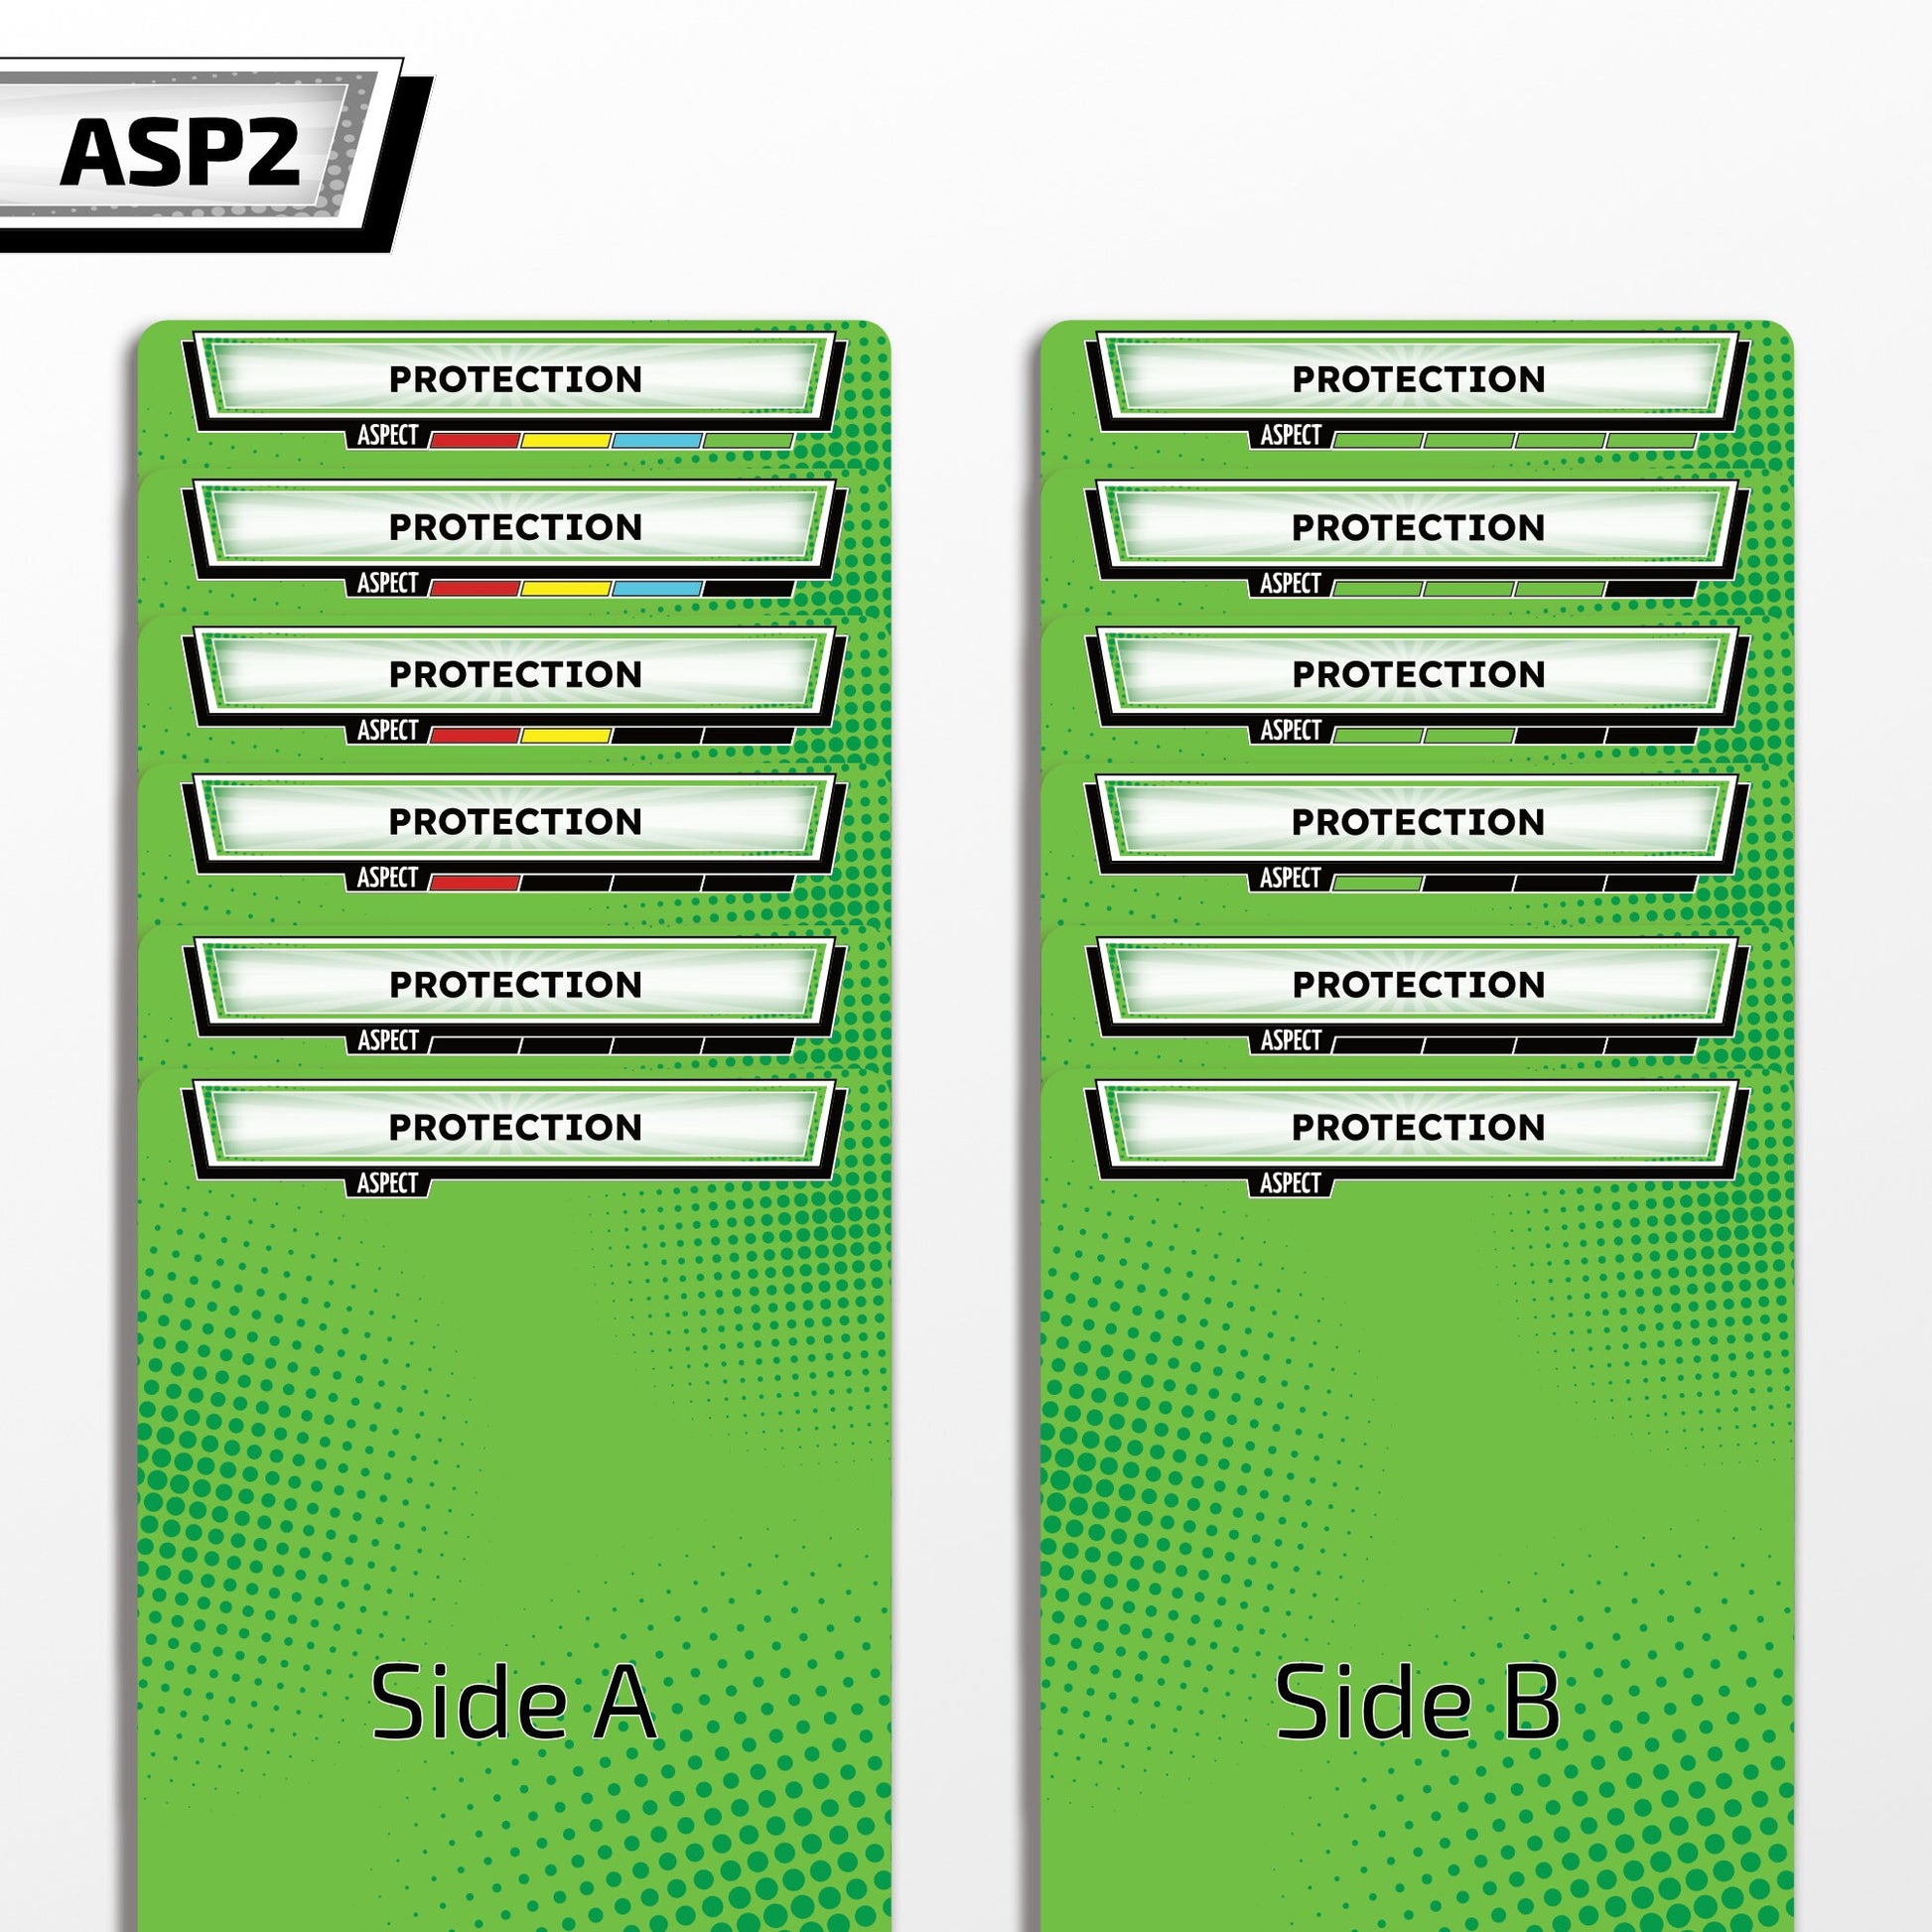 Aspect Cards Dividers Set for Marvel Champions - ASP2 - Arranged by Energy Level (Protection Card Example - Dual Size Design)